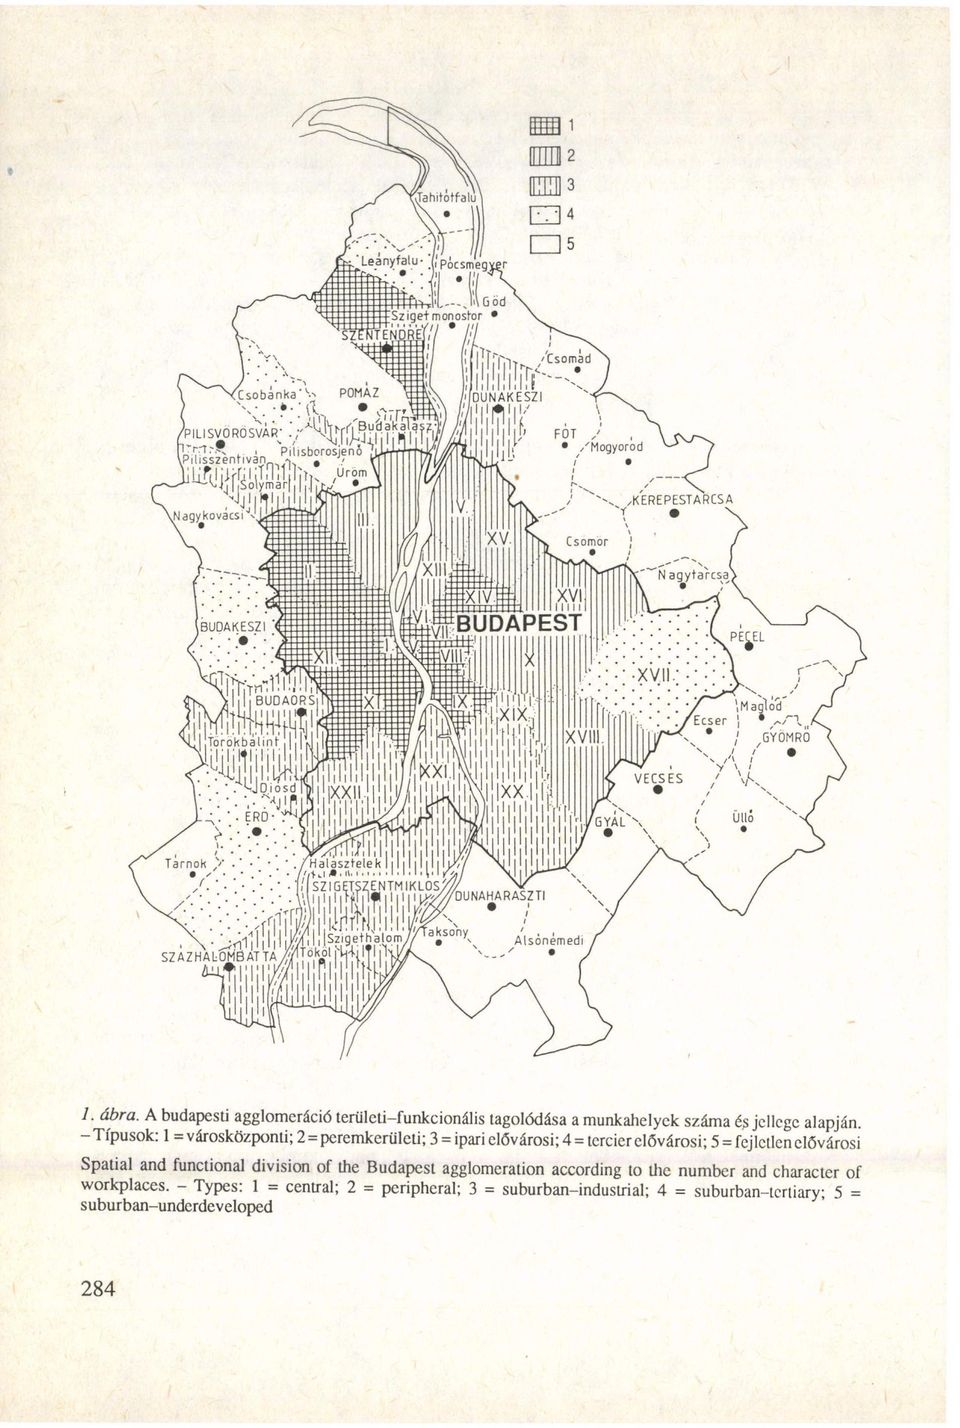 Spatial and functional division of the Budapest agglomeration according to the number and character of workplaces.